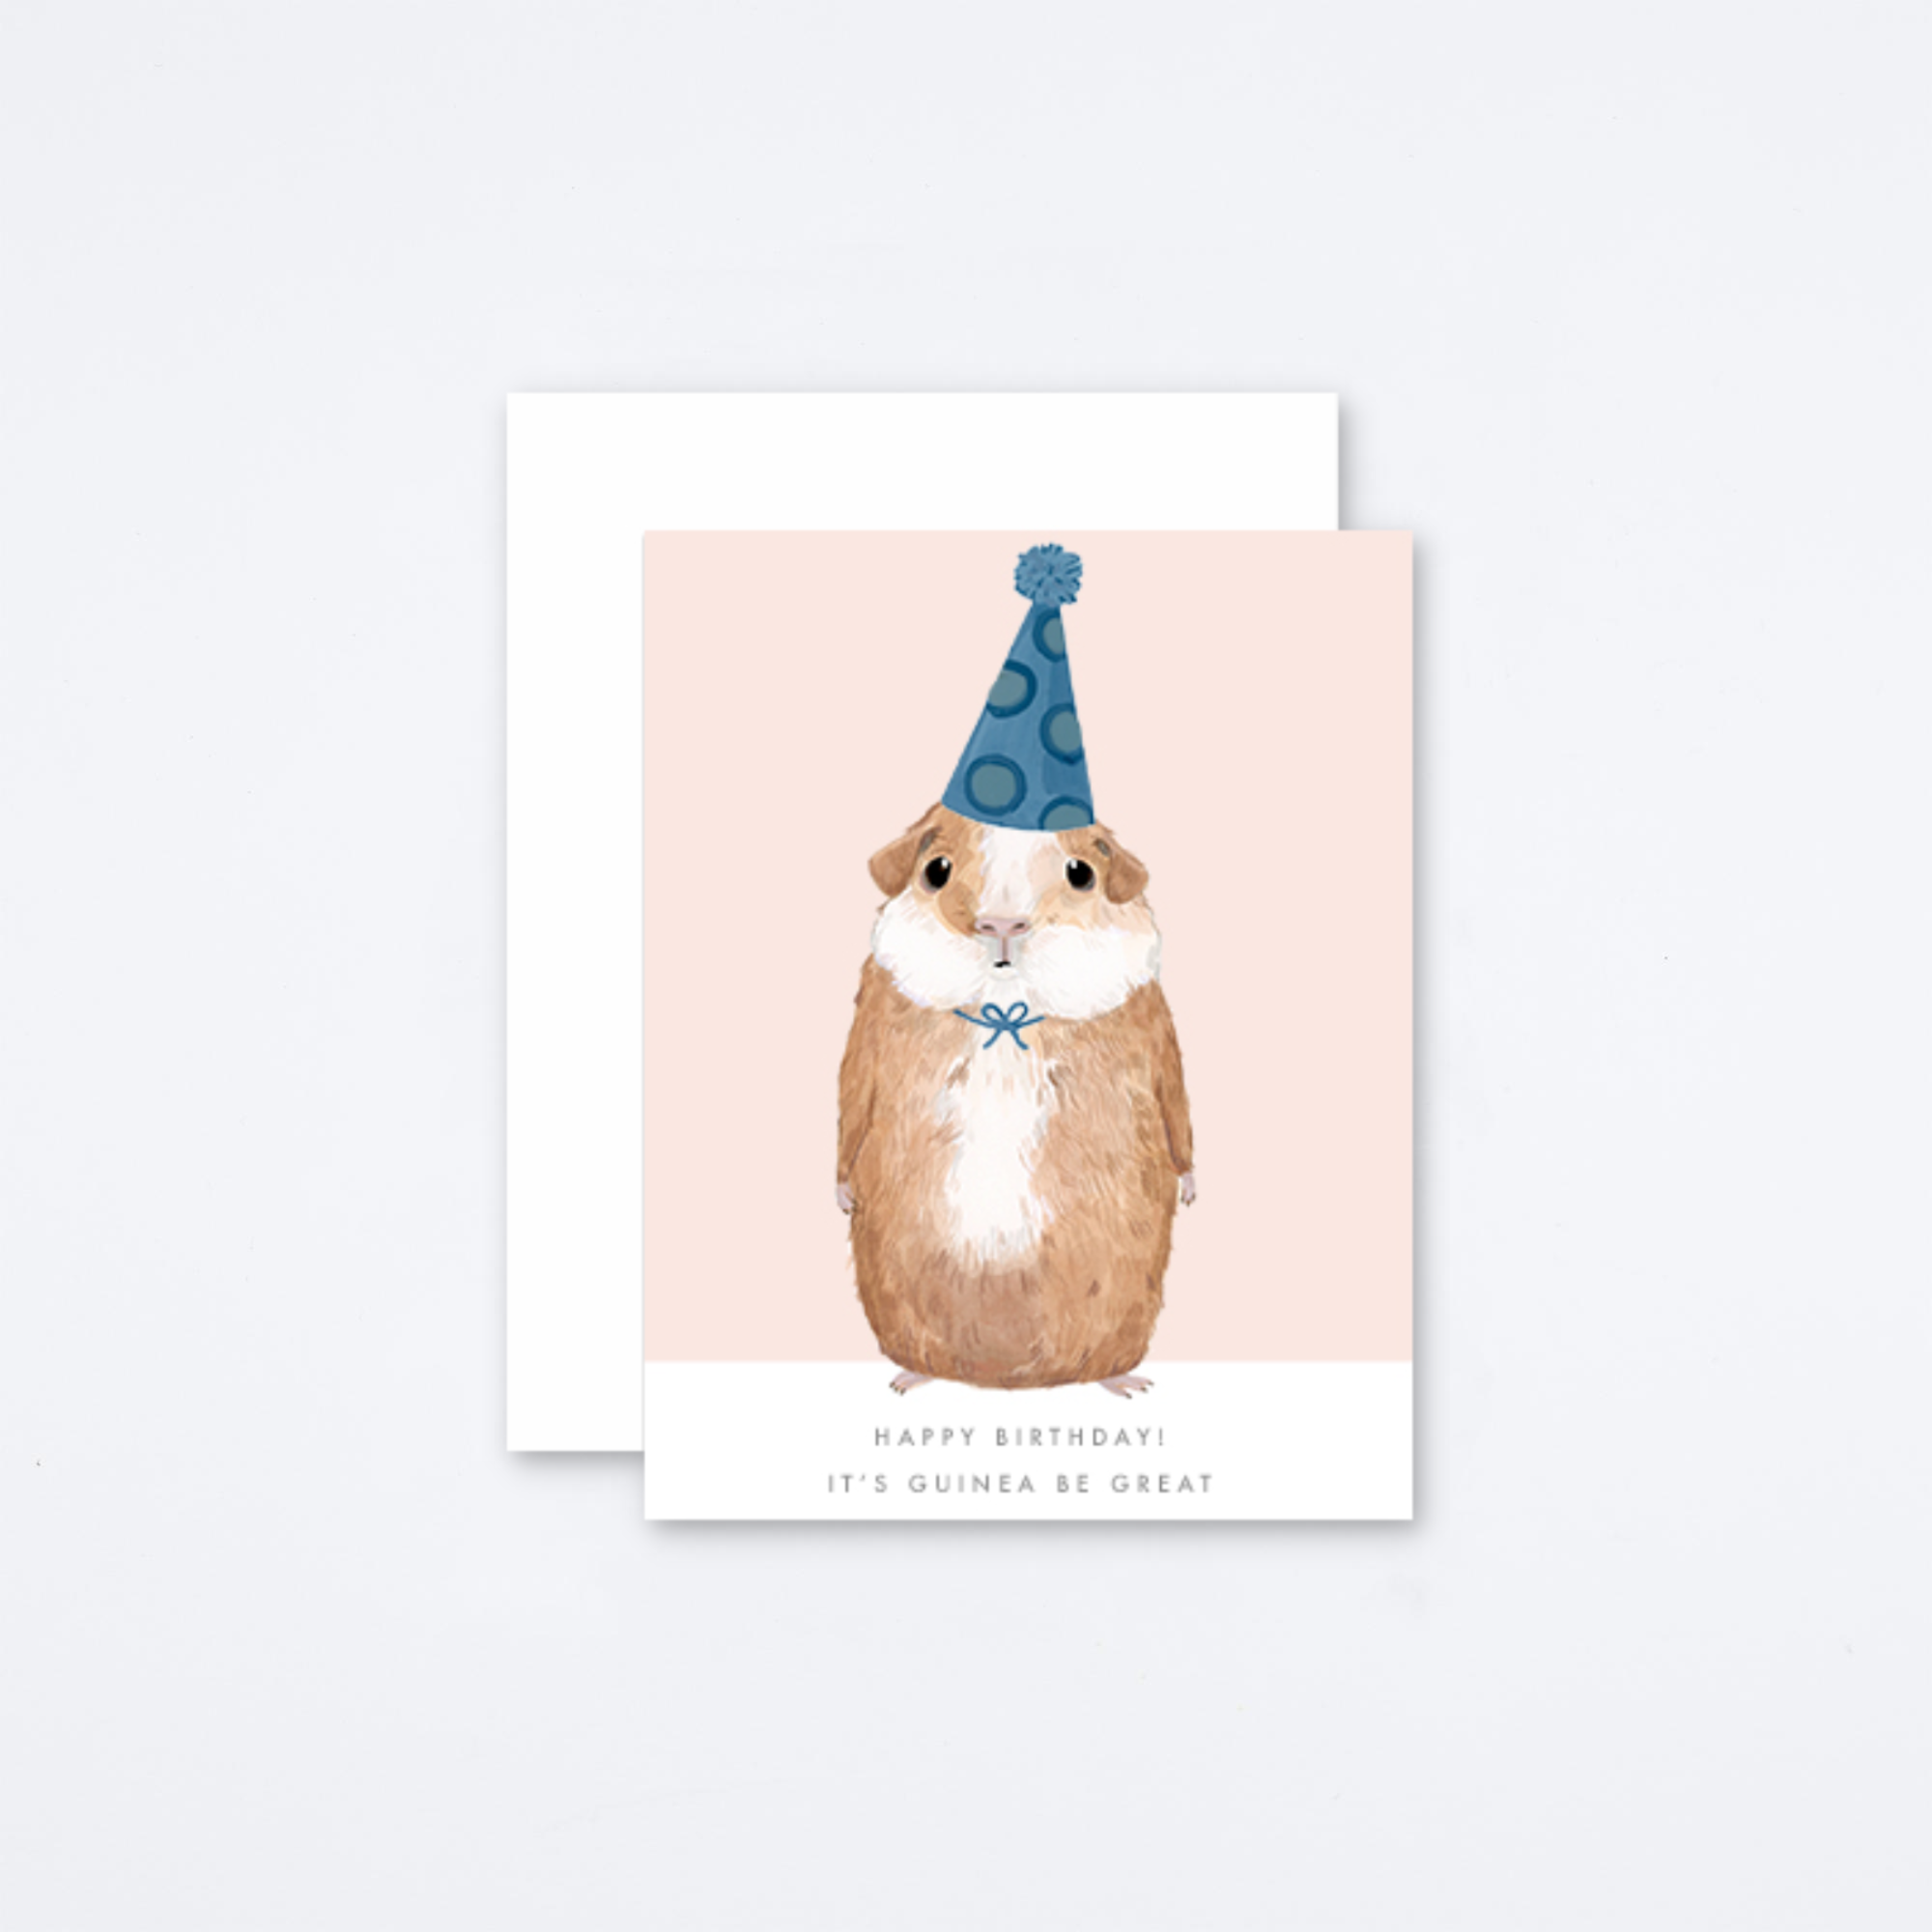 Guinea Be Great Birthday Card